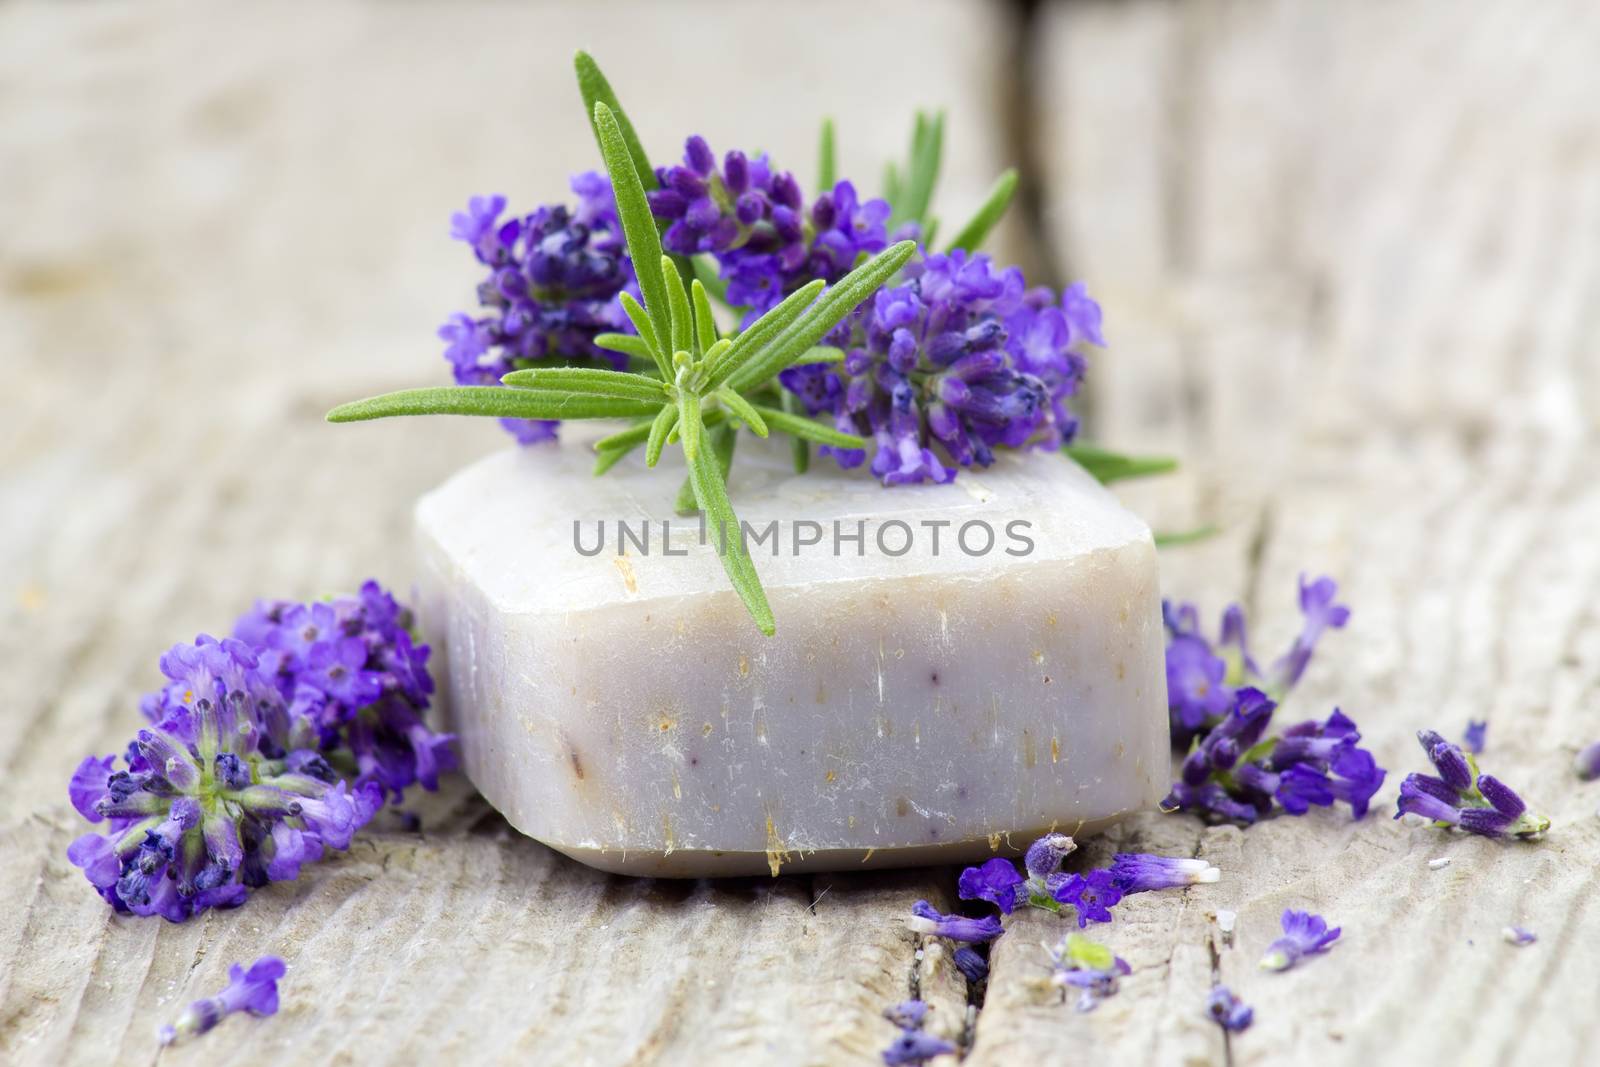 bar of natural soap and lavender flowers